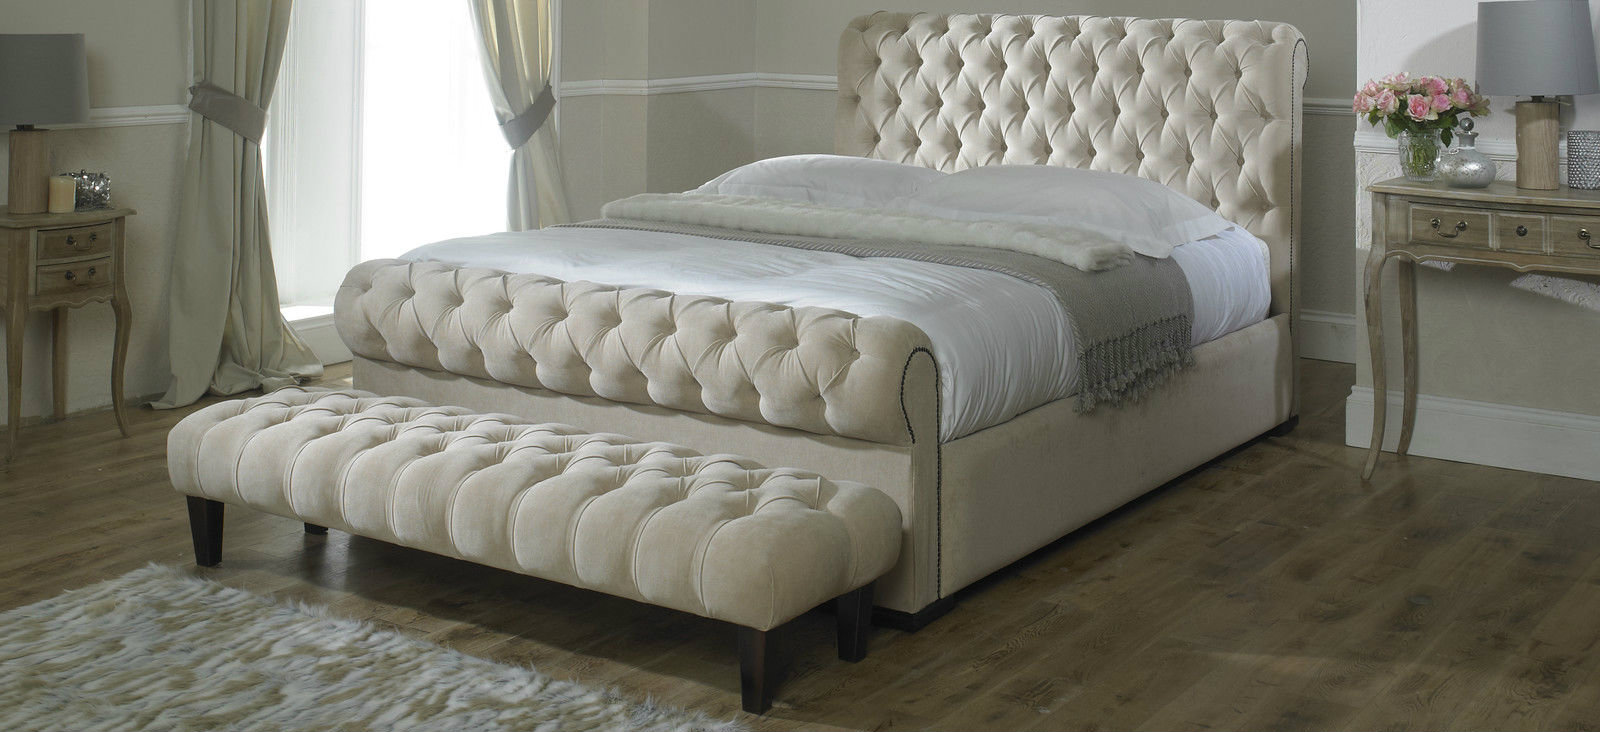 Installation Service Available on all our Waterbeds